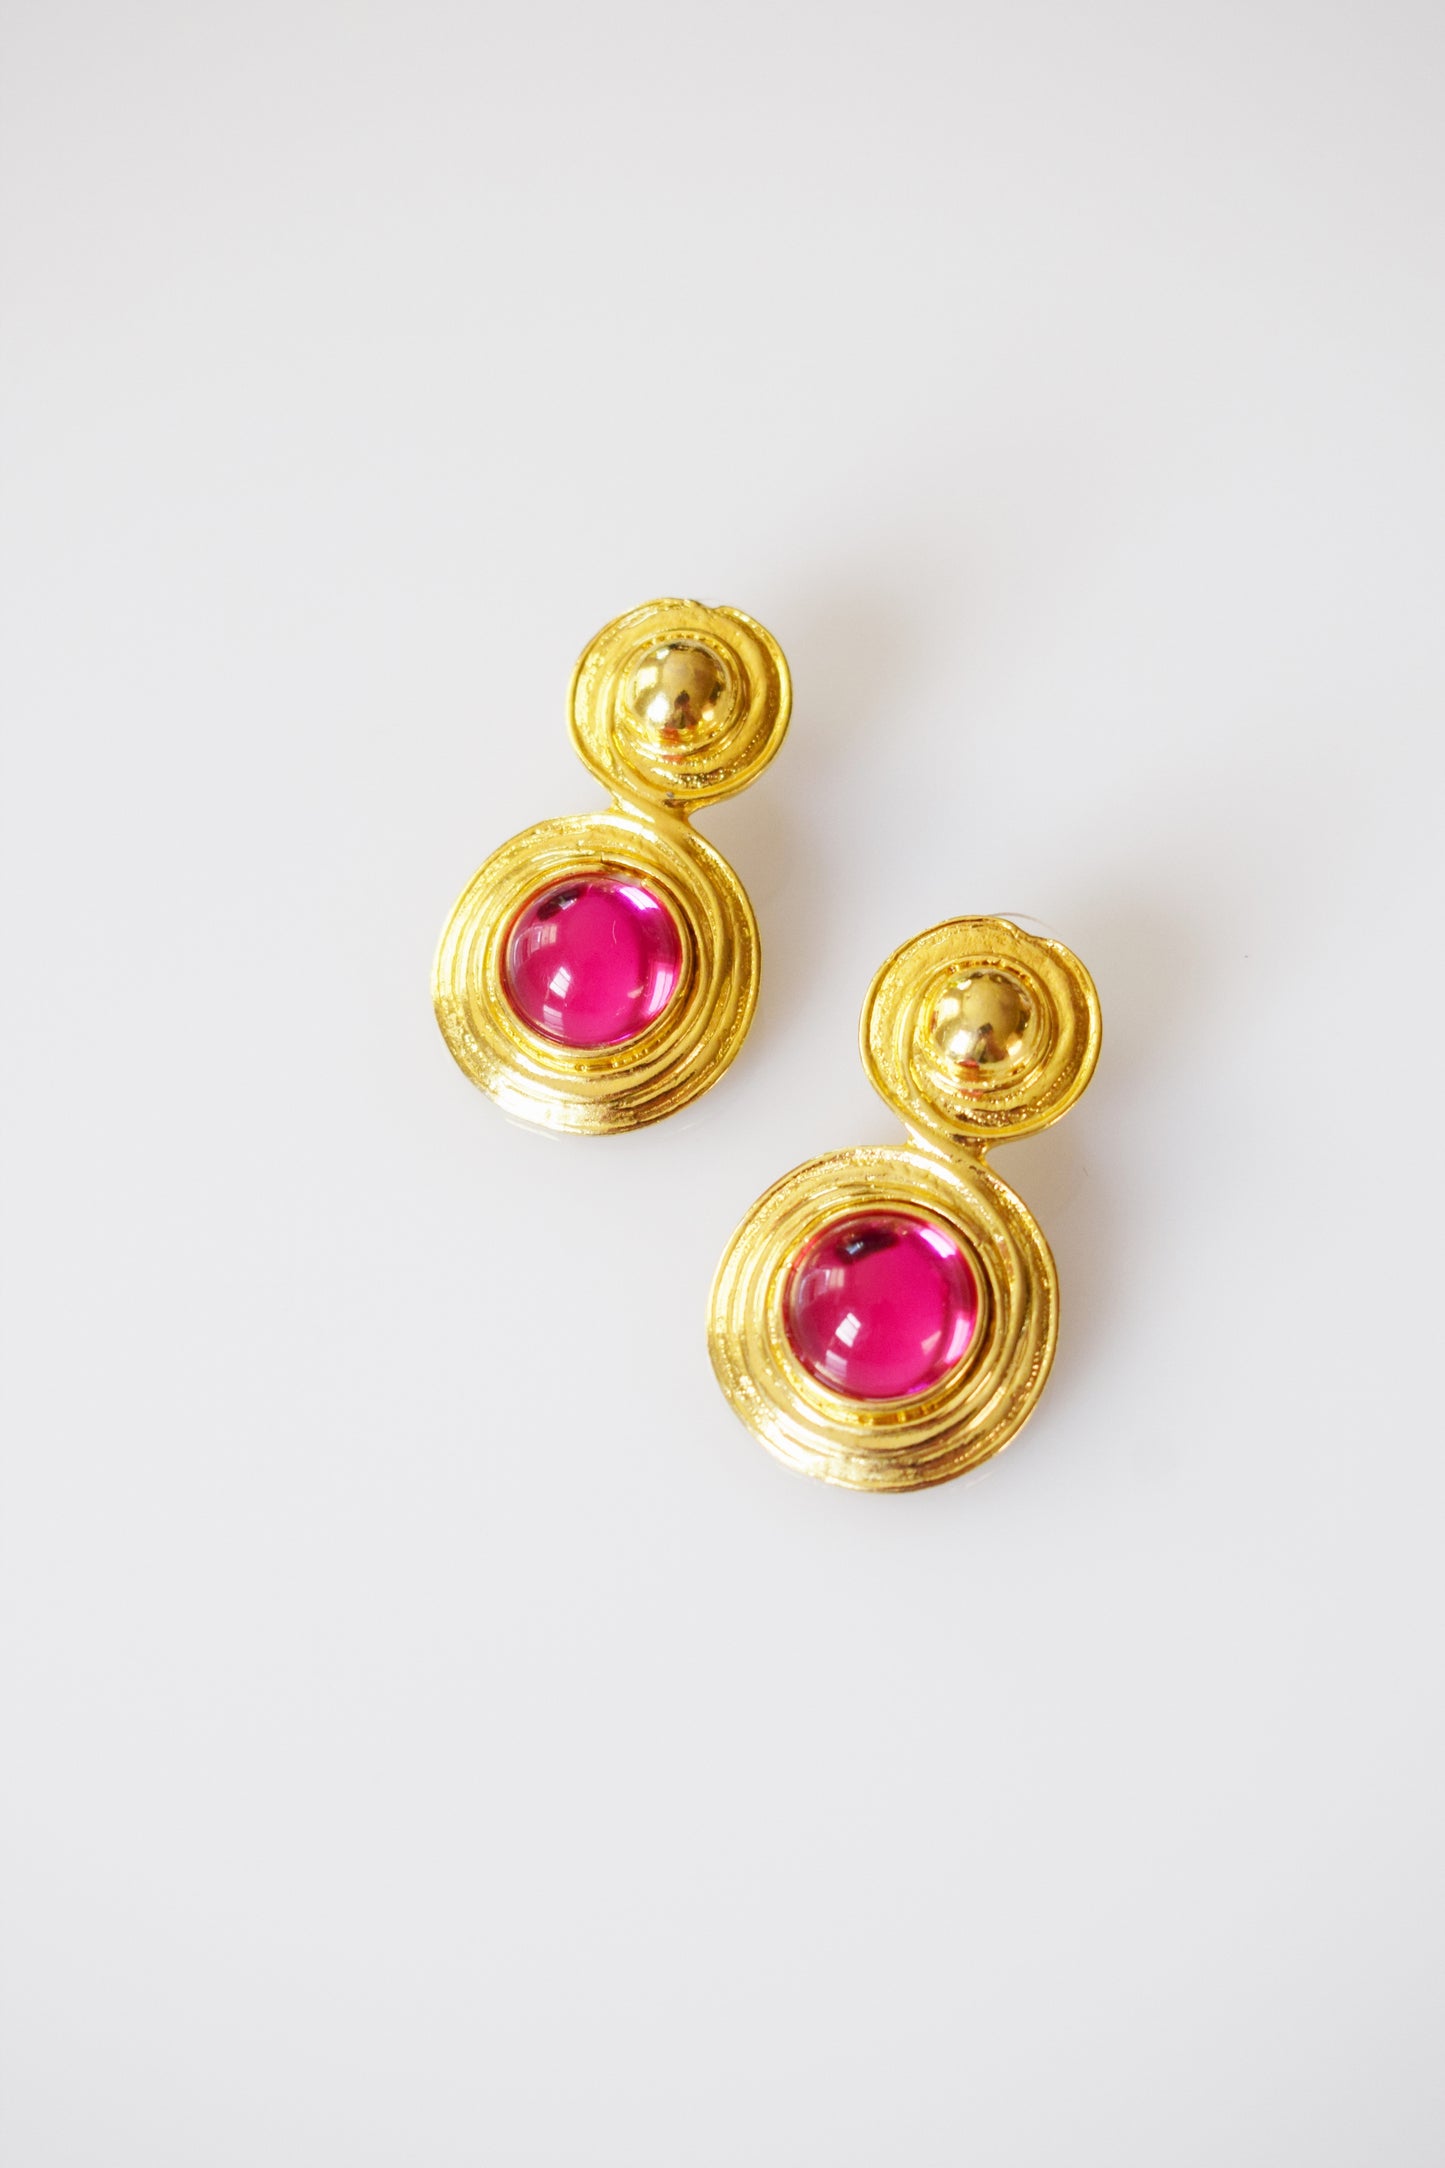 90s Gold and Hot Pink Gripoix-style Fashion Earrings